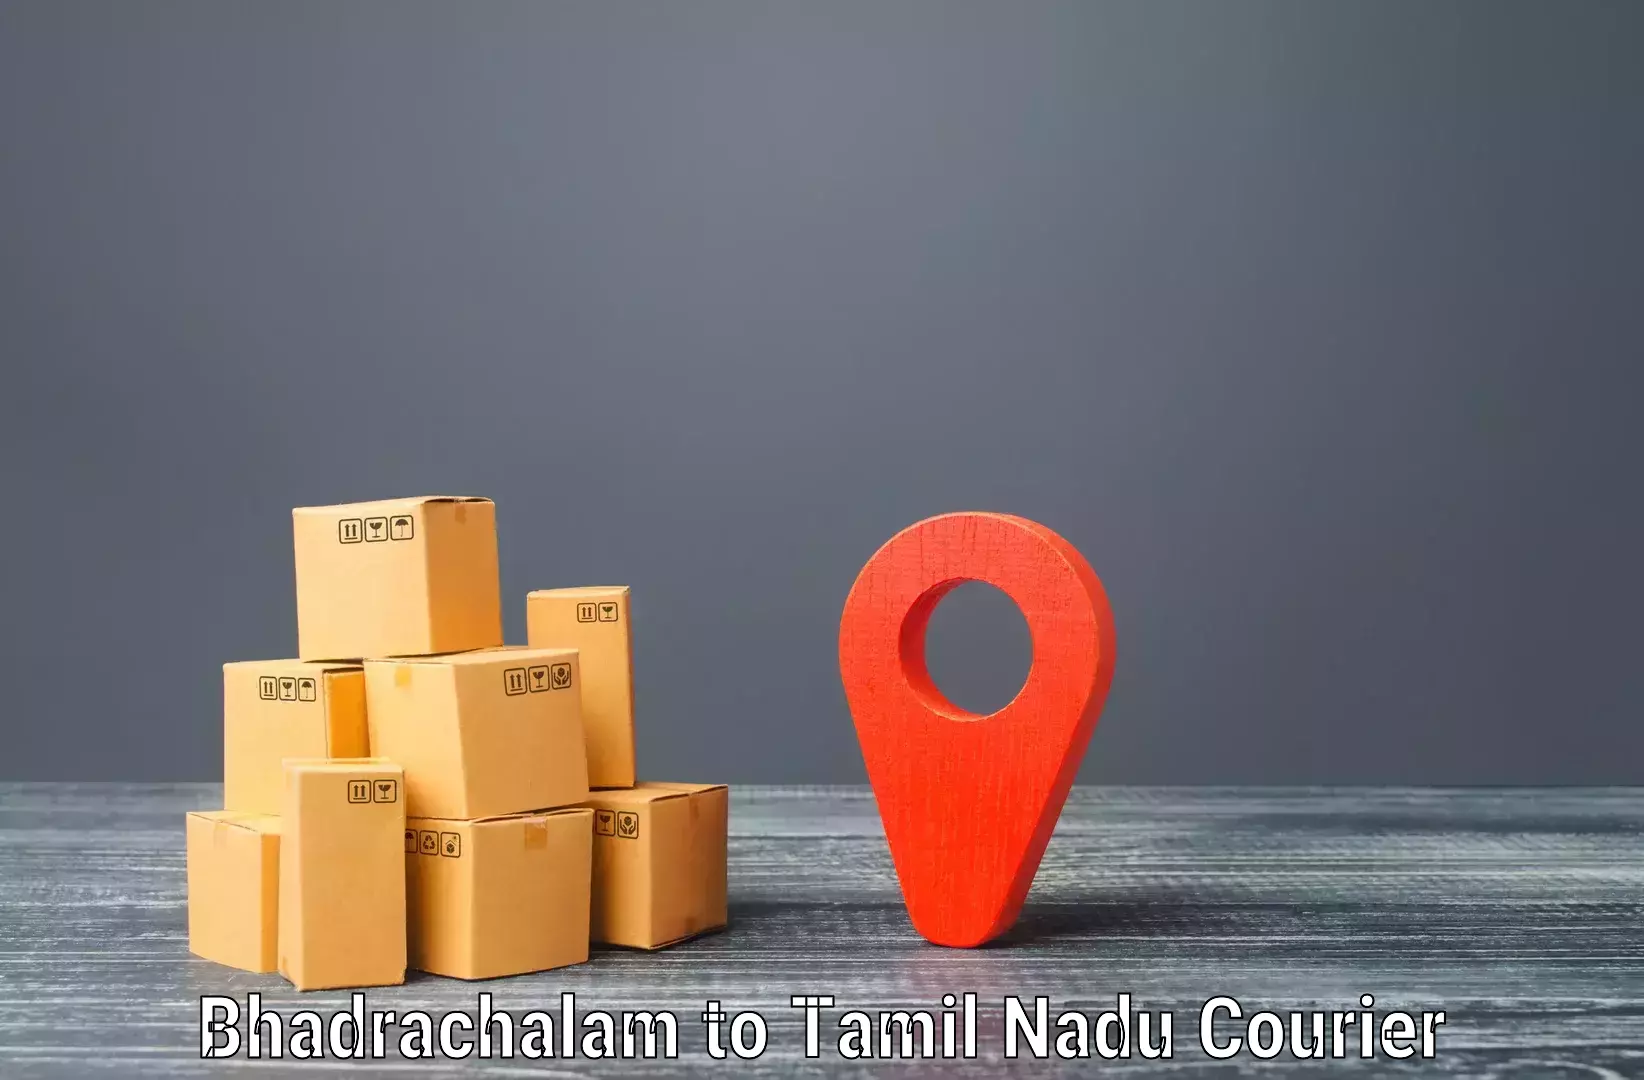 On-call courier service Bhadrachalam to Cheyyar